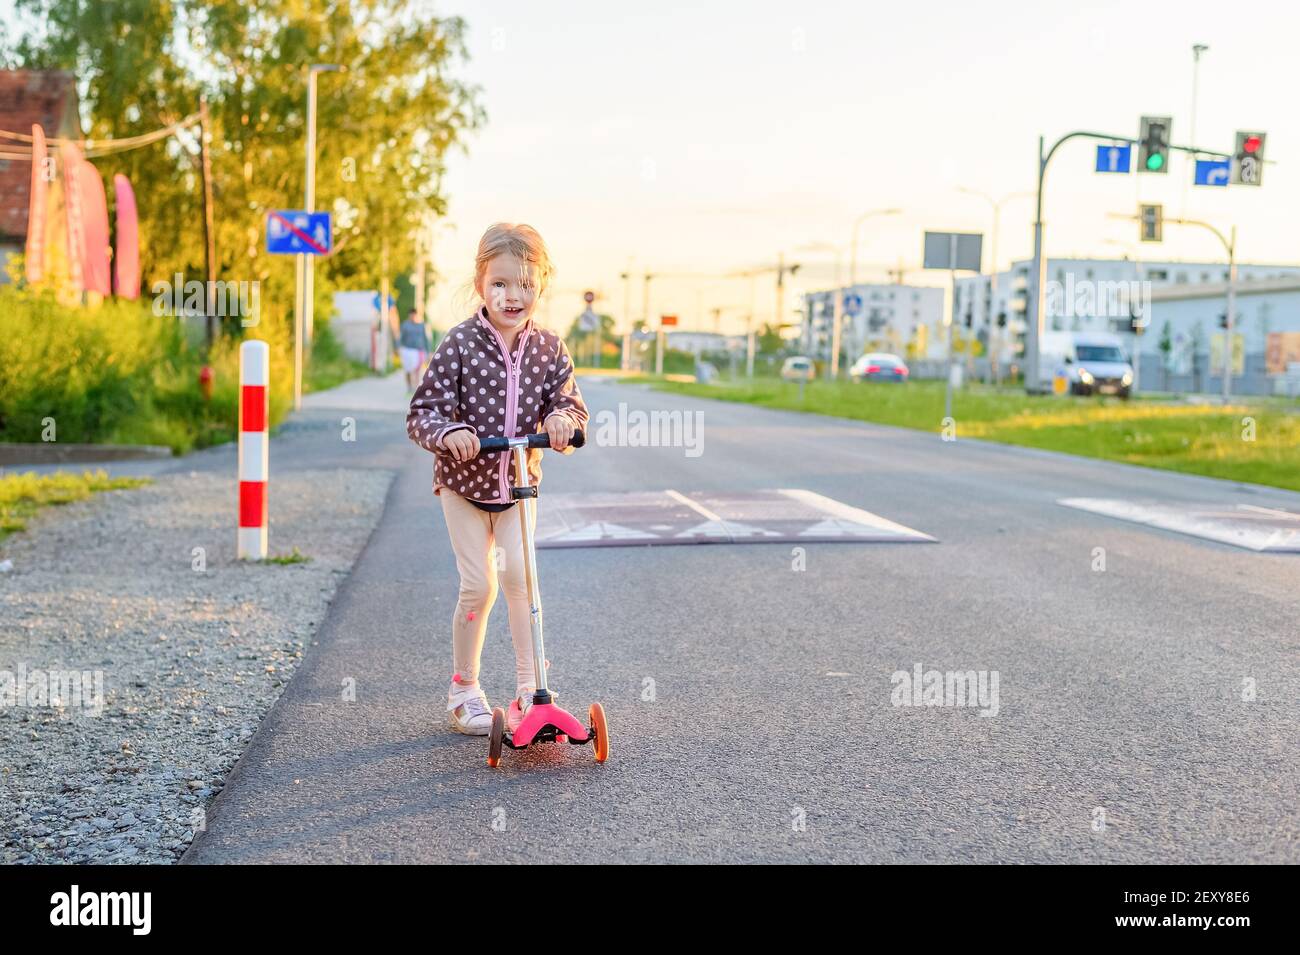 Preschooler girl riding scooter outdoors. Outdoor portrait of cute blonde hair little girl on kick scooter on a road with sunny blurred background Stock Photo